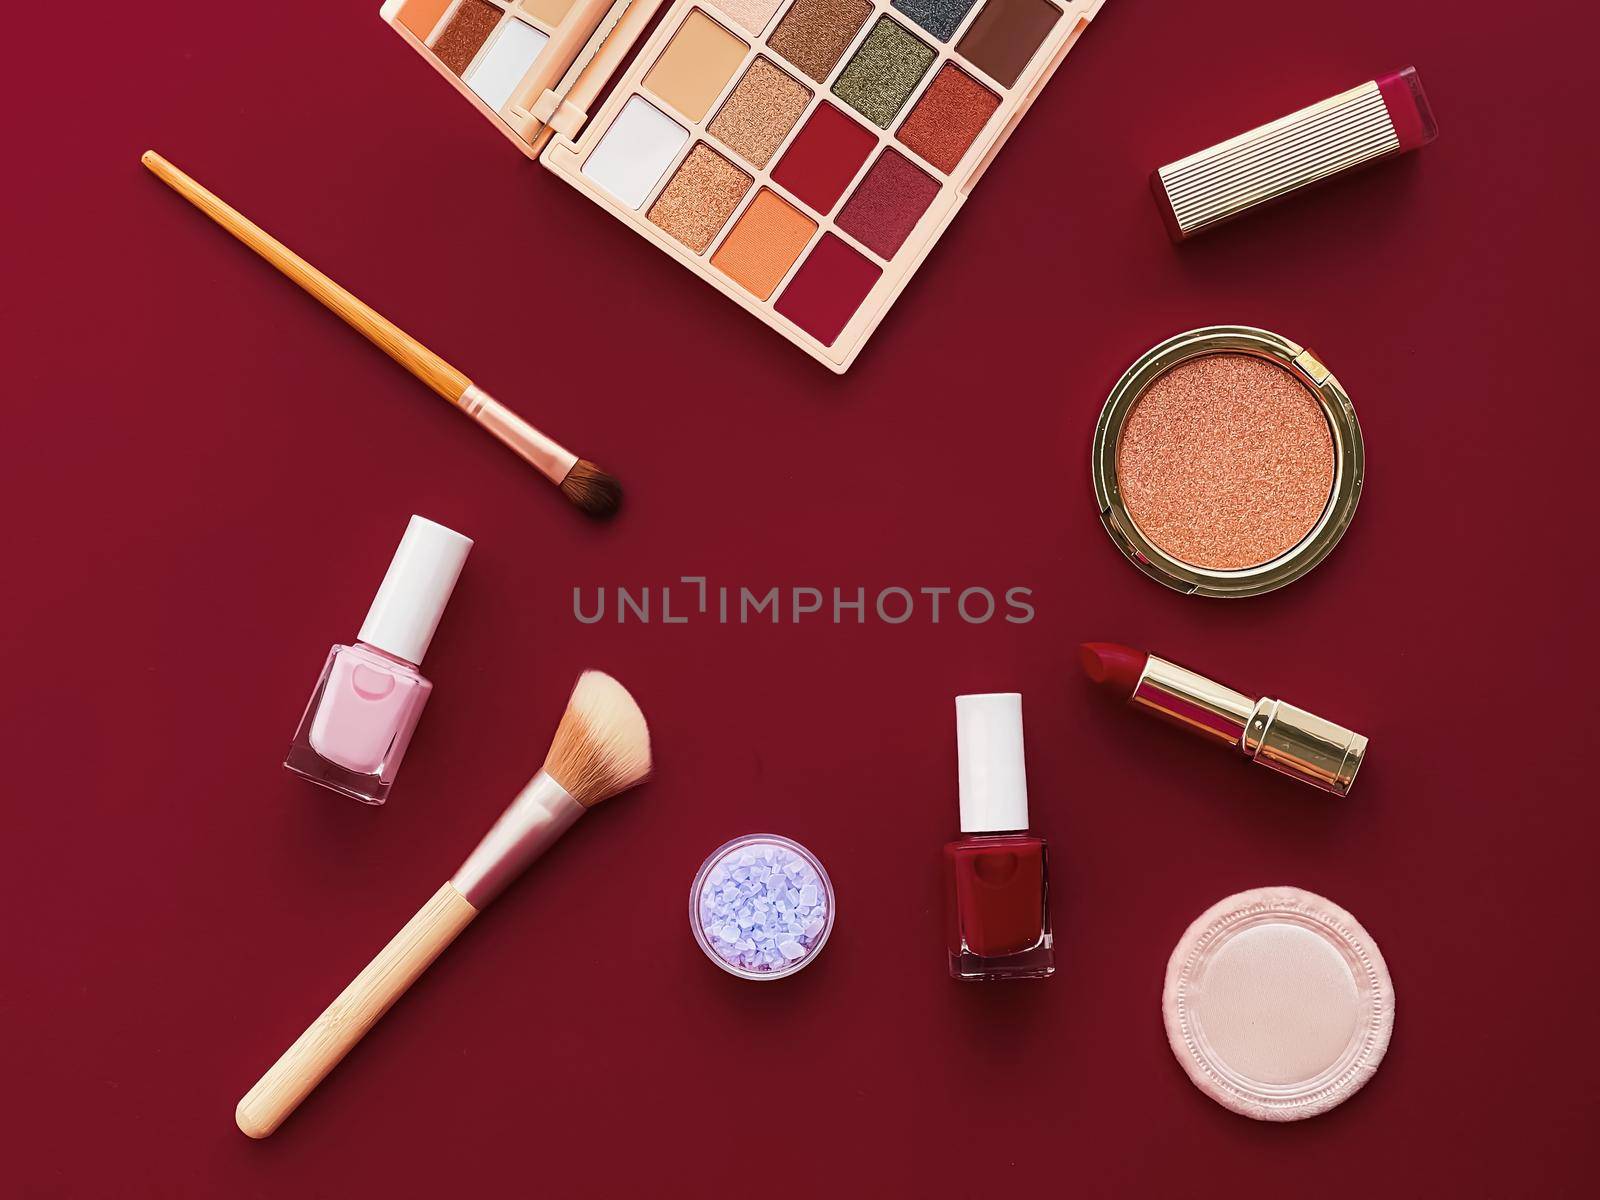 Beauty, make-up and cosmetics flatlay design with copyspace, cosmetic products and makeup tools on burgundy background, girly and feminine style by Anneleven